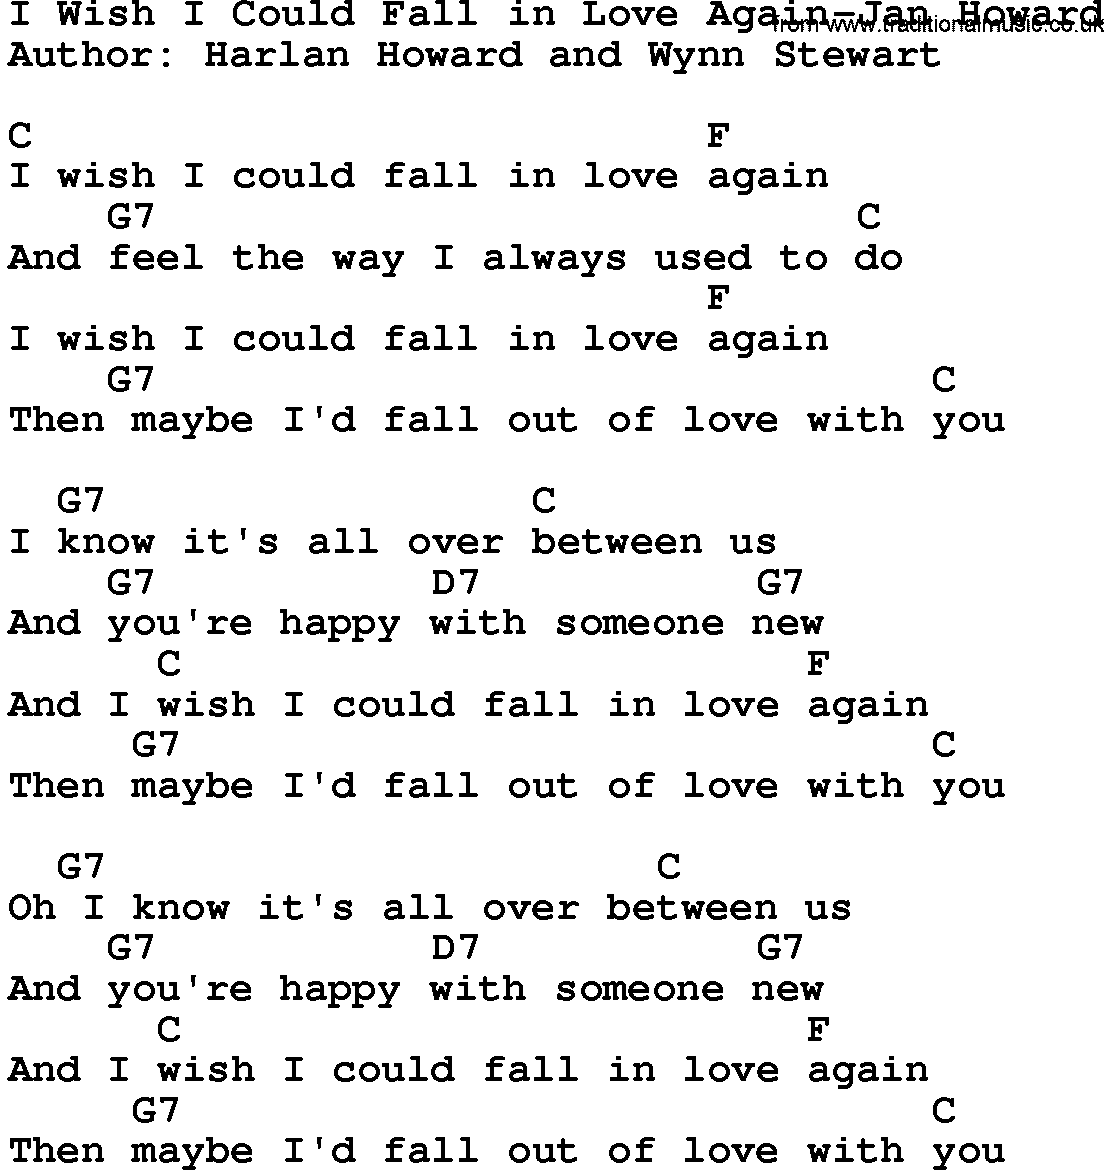 Country music song: I Wish I Could Fall In Love Again-Jan Howard lyrics and chords